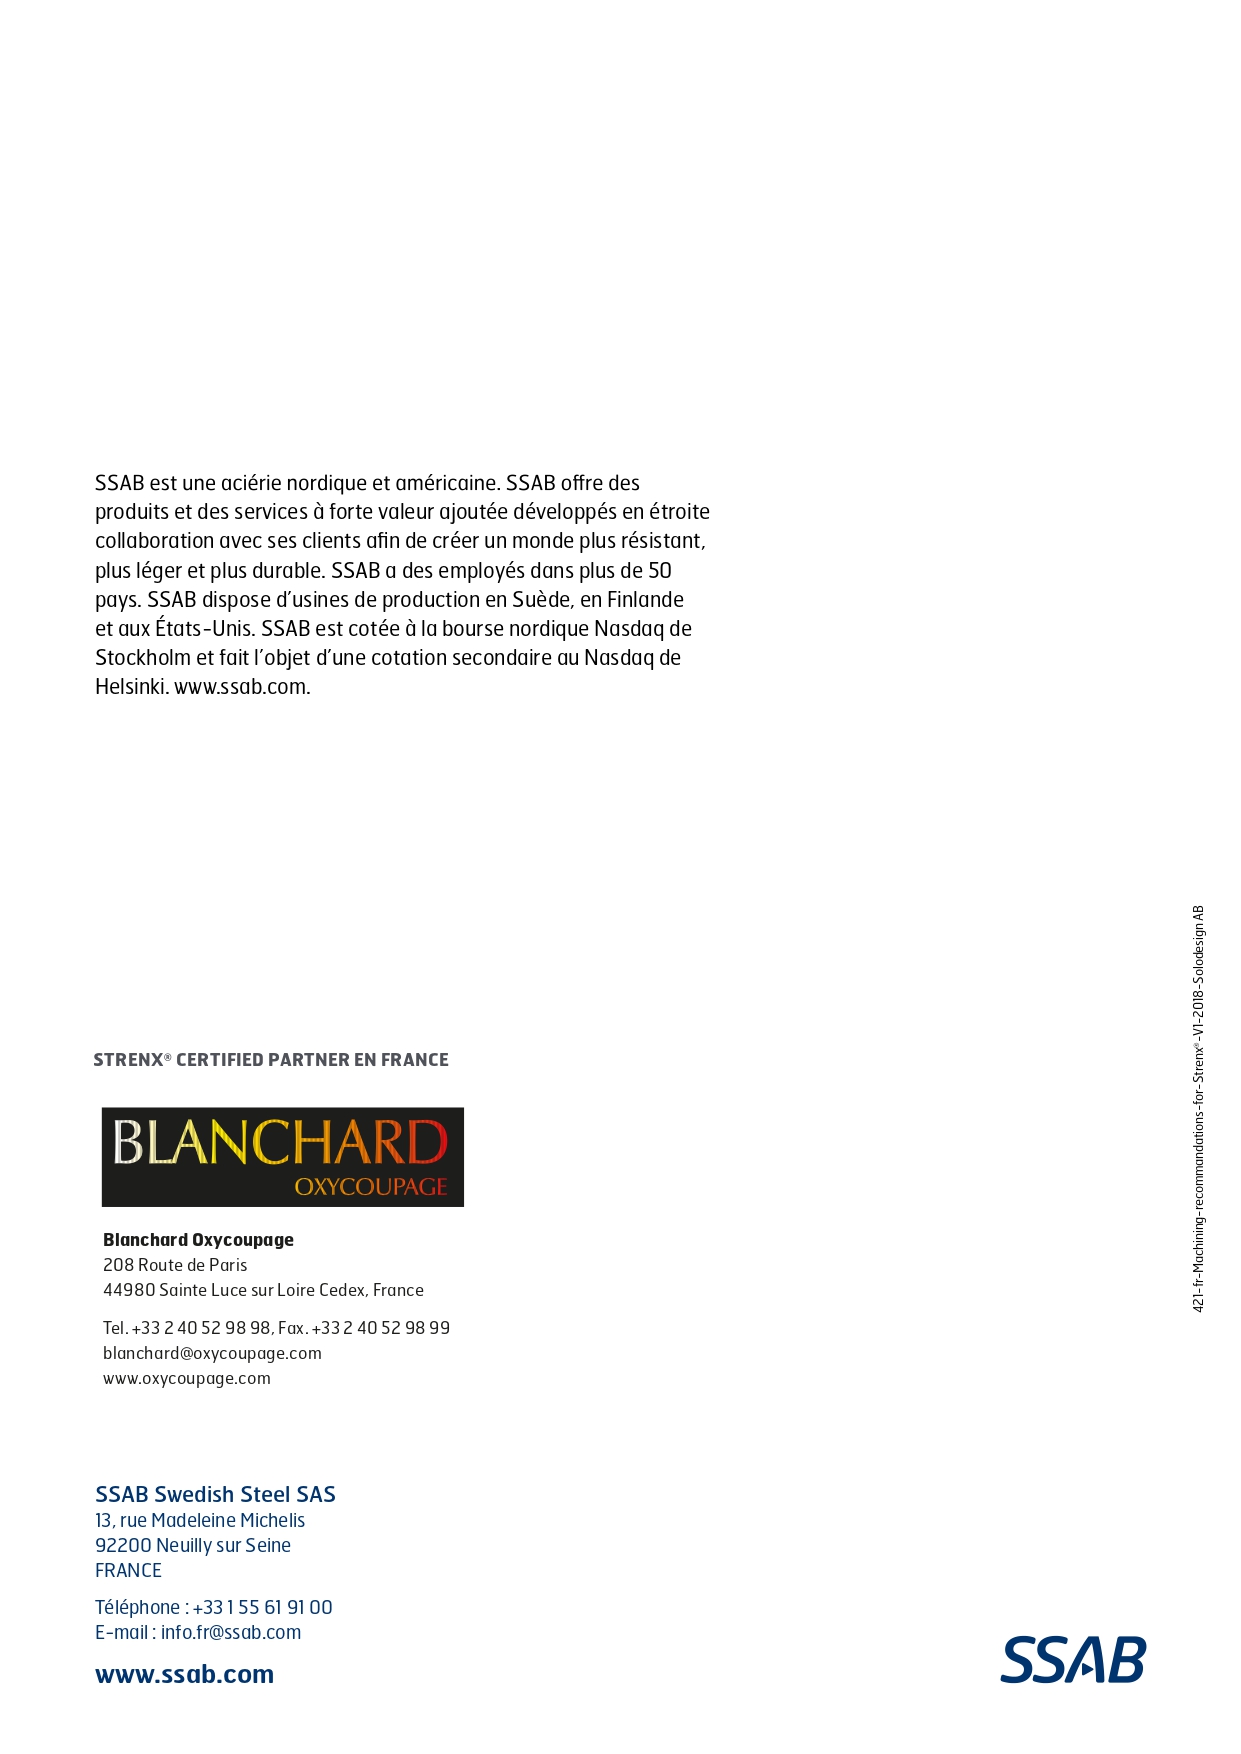 Brochure recommandations usinage Strenx®_page-0028